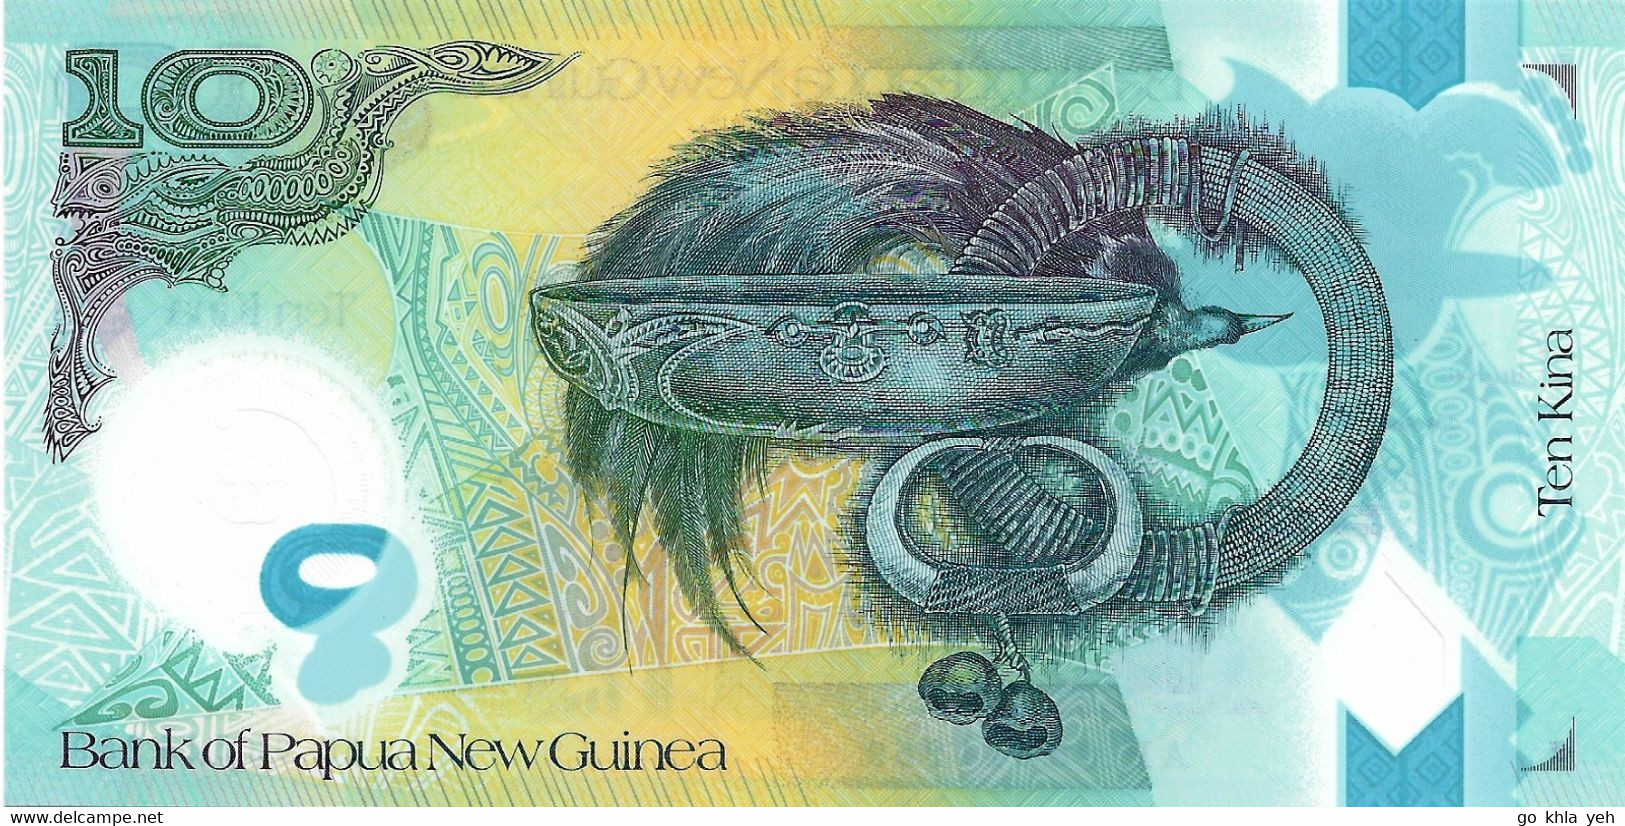 PAPOUASIE - NOUVELLE-GUINEE 2008 10 Kina - P.30a Neuf UNC - Papua New Guinea